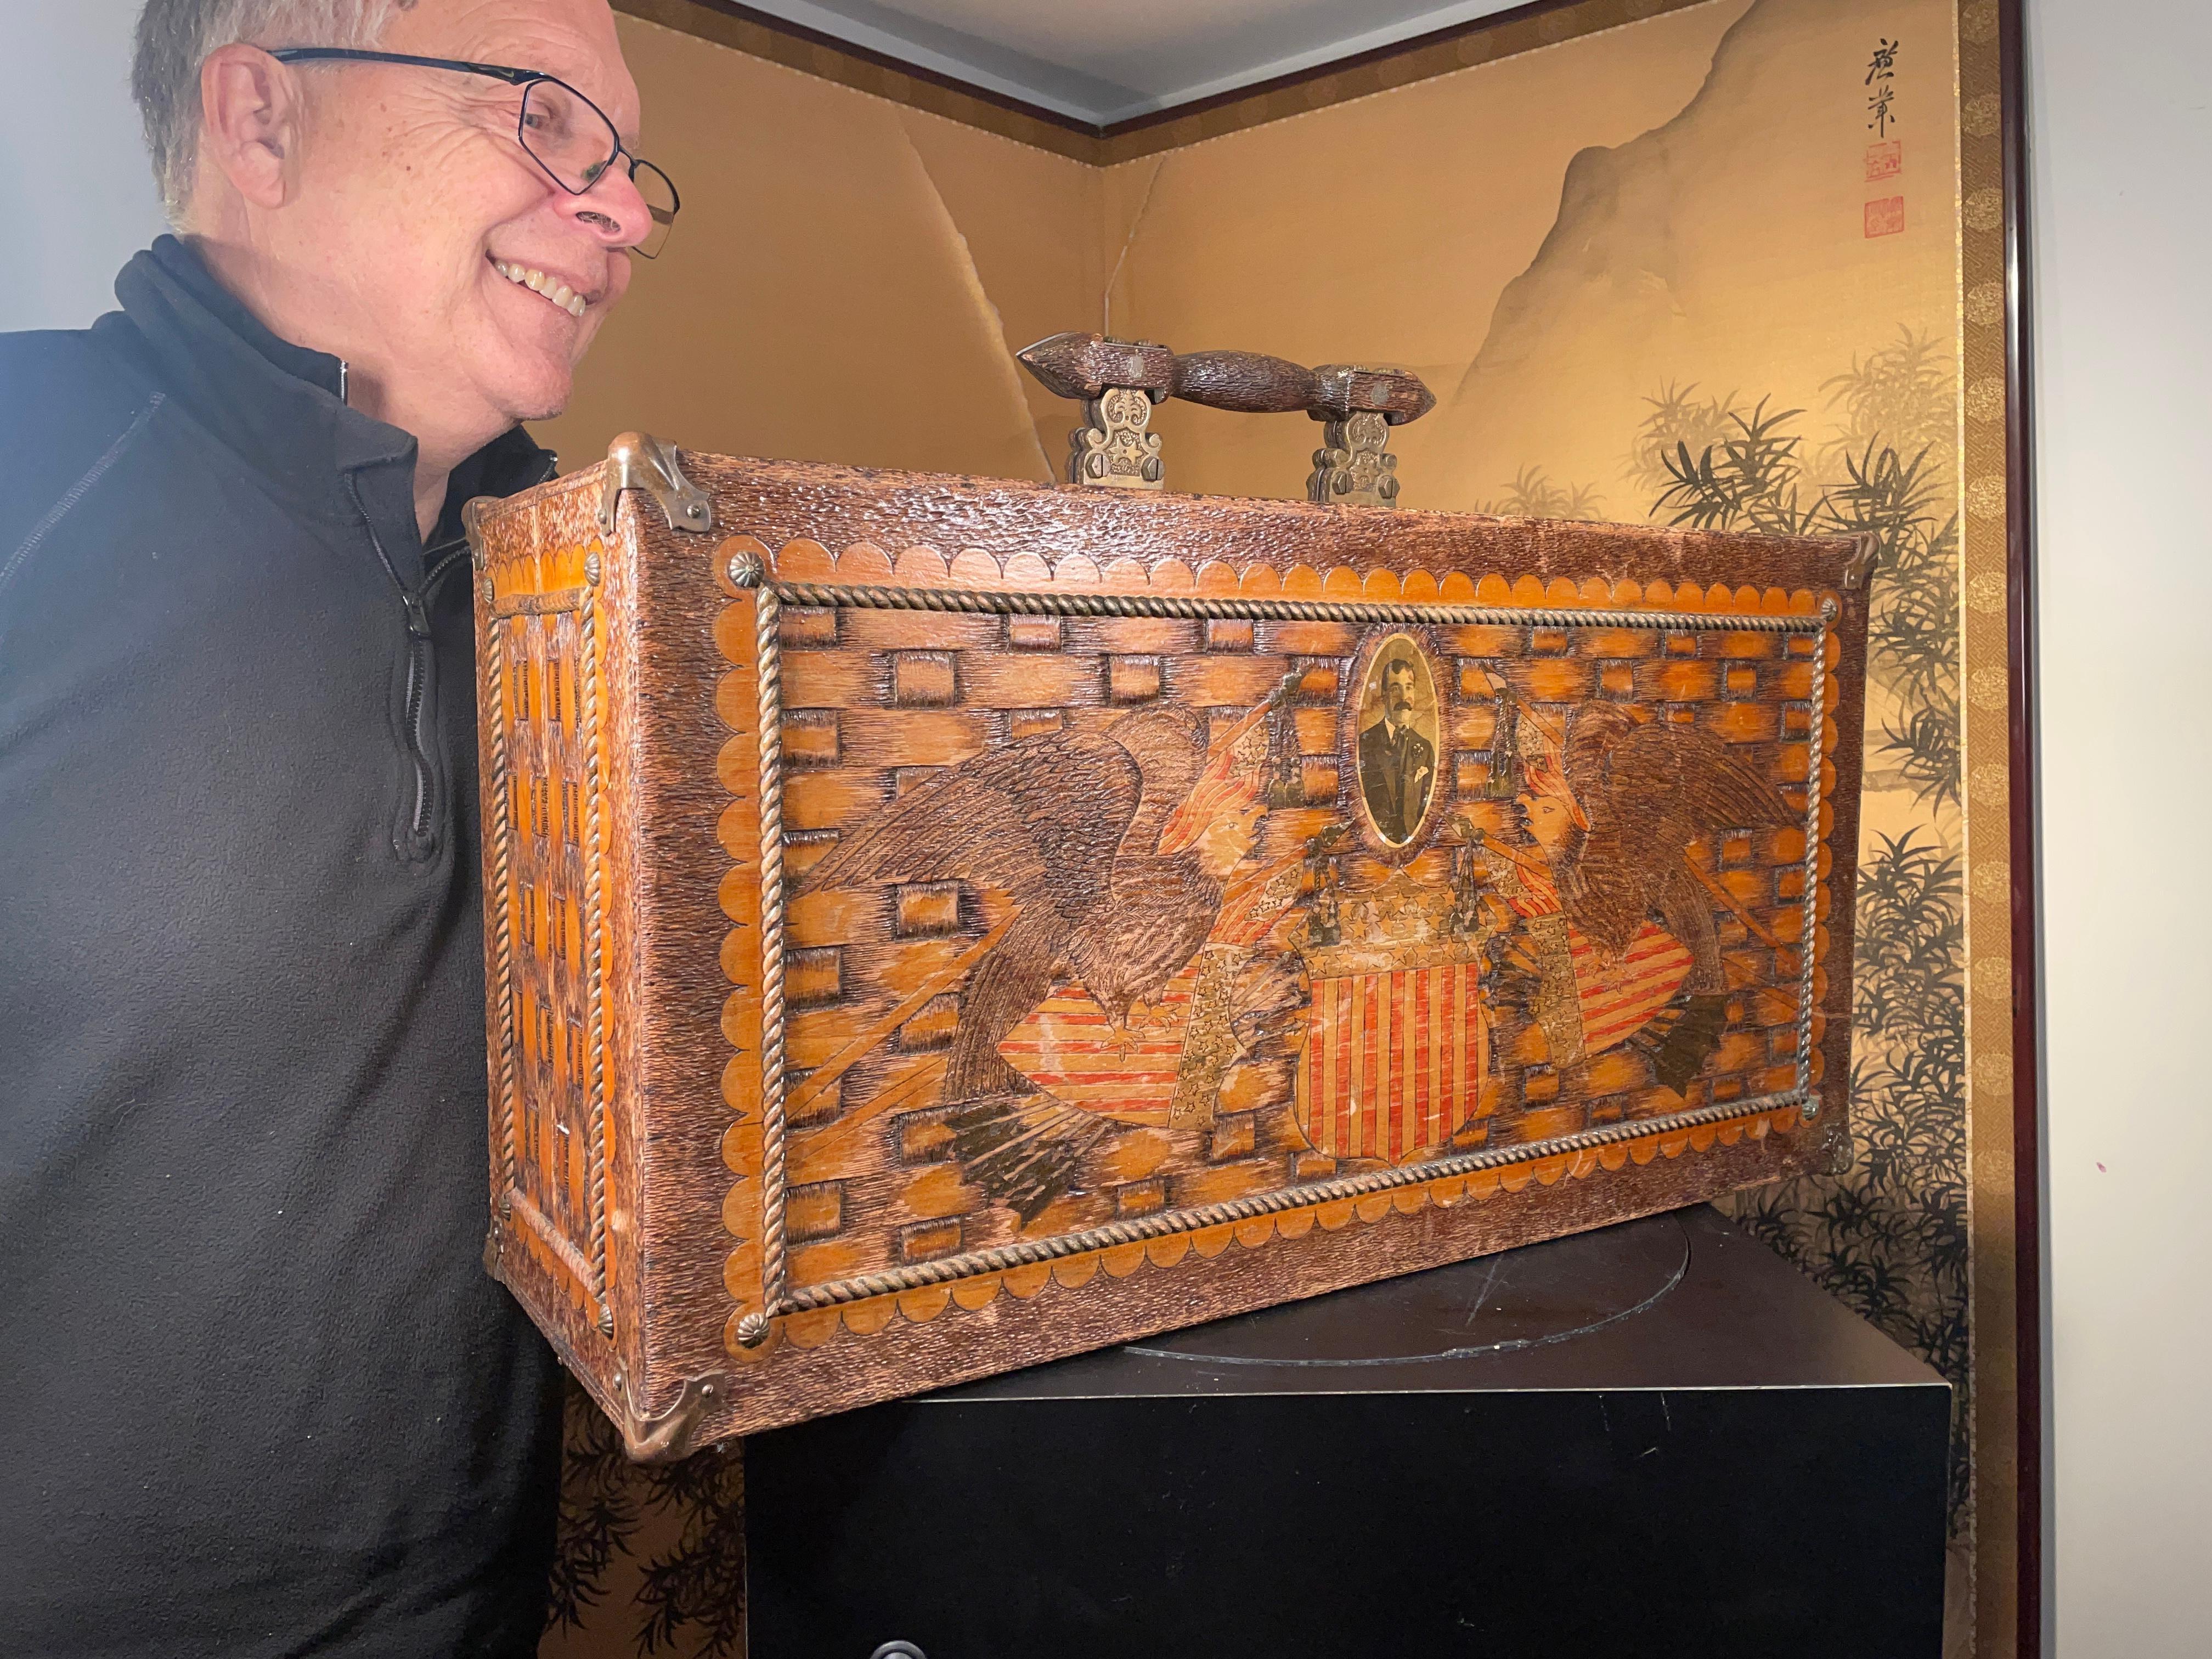 From an old New England collection.

An elaborate antique american folk art pyrography wood trunk. This highly detailed suitcase is hand crafted of wood and brass - the wood has been burned, carved & painted with American heraldic symbols